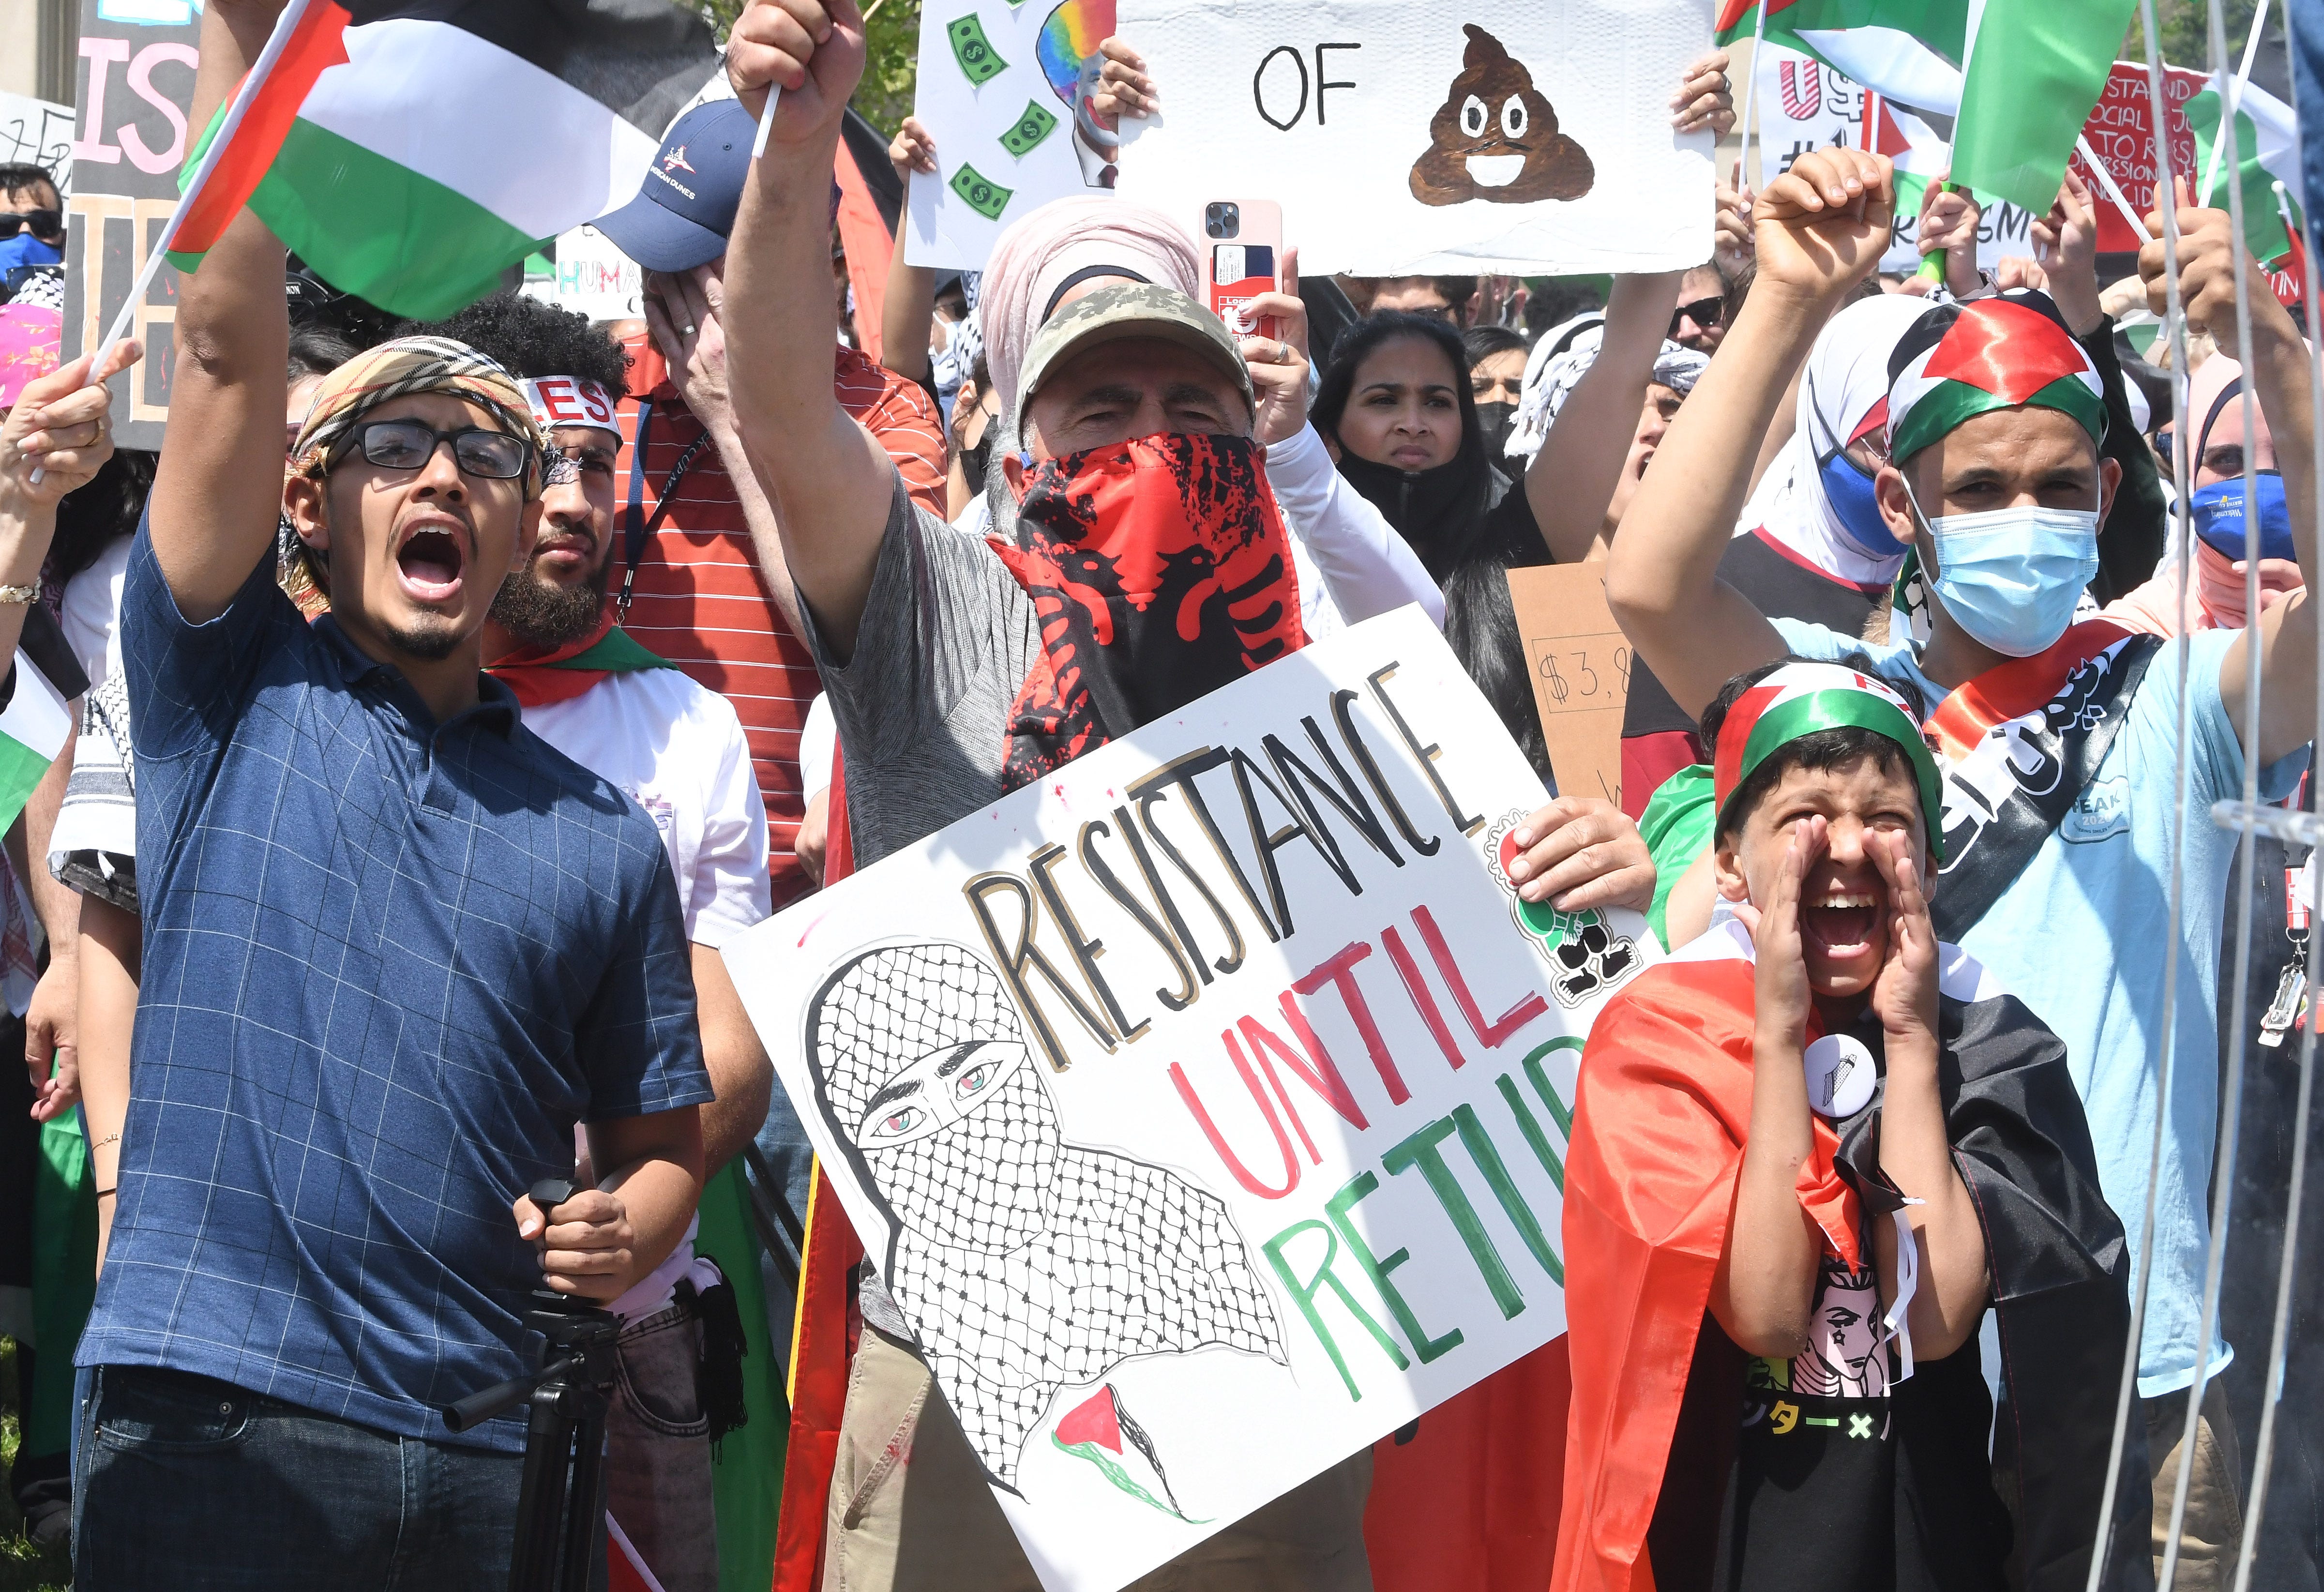 Thousands of Palestinian supporters listen to speeches during Palestinian protest and march, at the same time President Joe Biden is visiting in another part of Dearborn, Michigan on May 18, 2021.